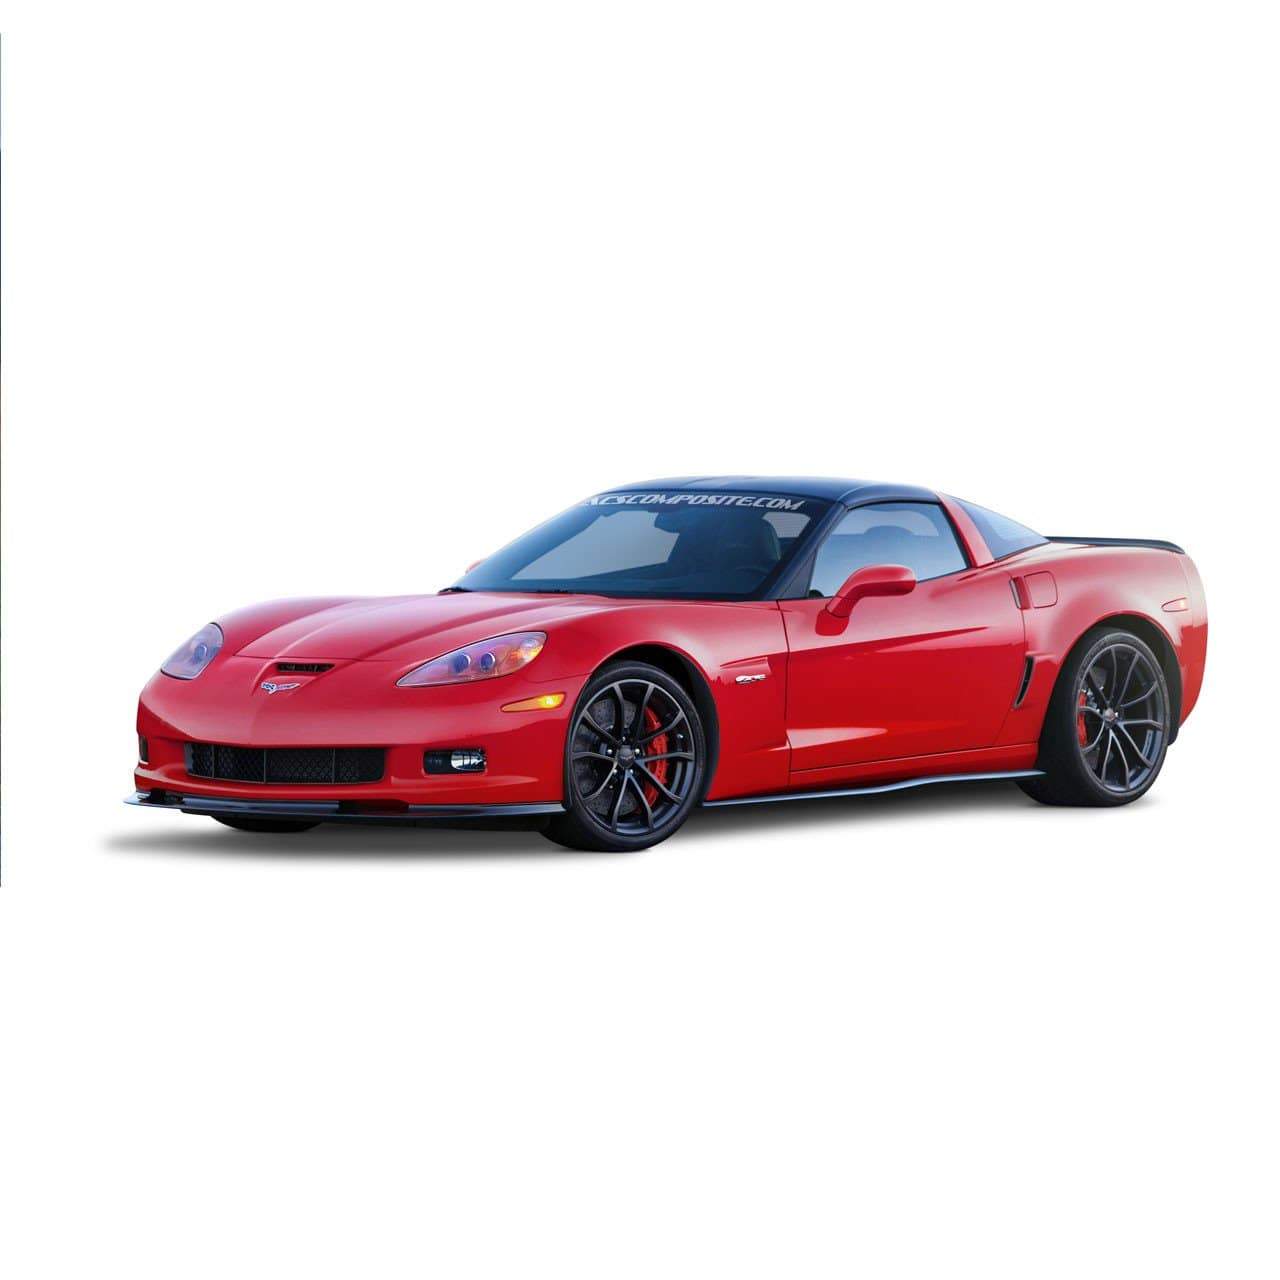 ACS Composite Zero6 Side Rockers for C6 Corvette in Black Primer with Rear Deflectors [SKU: 27-4-043 27-4-027] - Performance and Protection Upgrade.